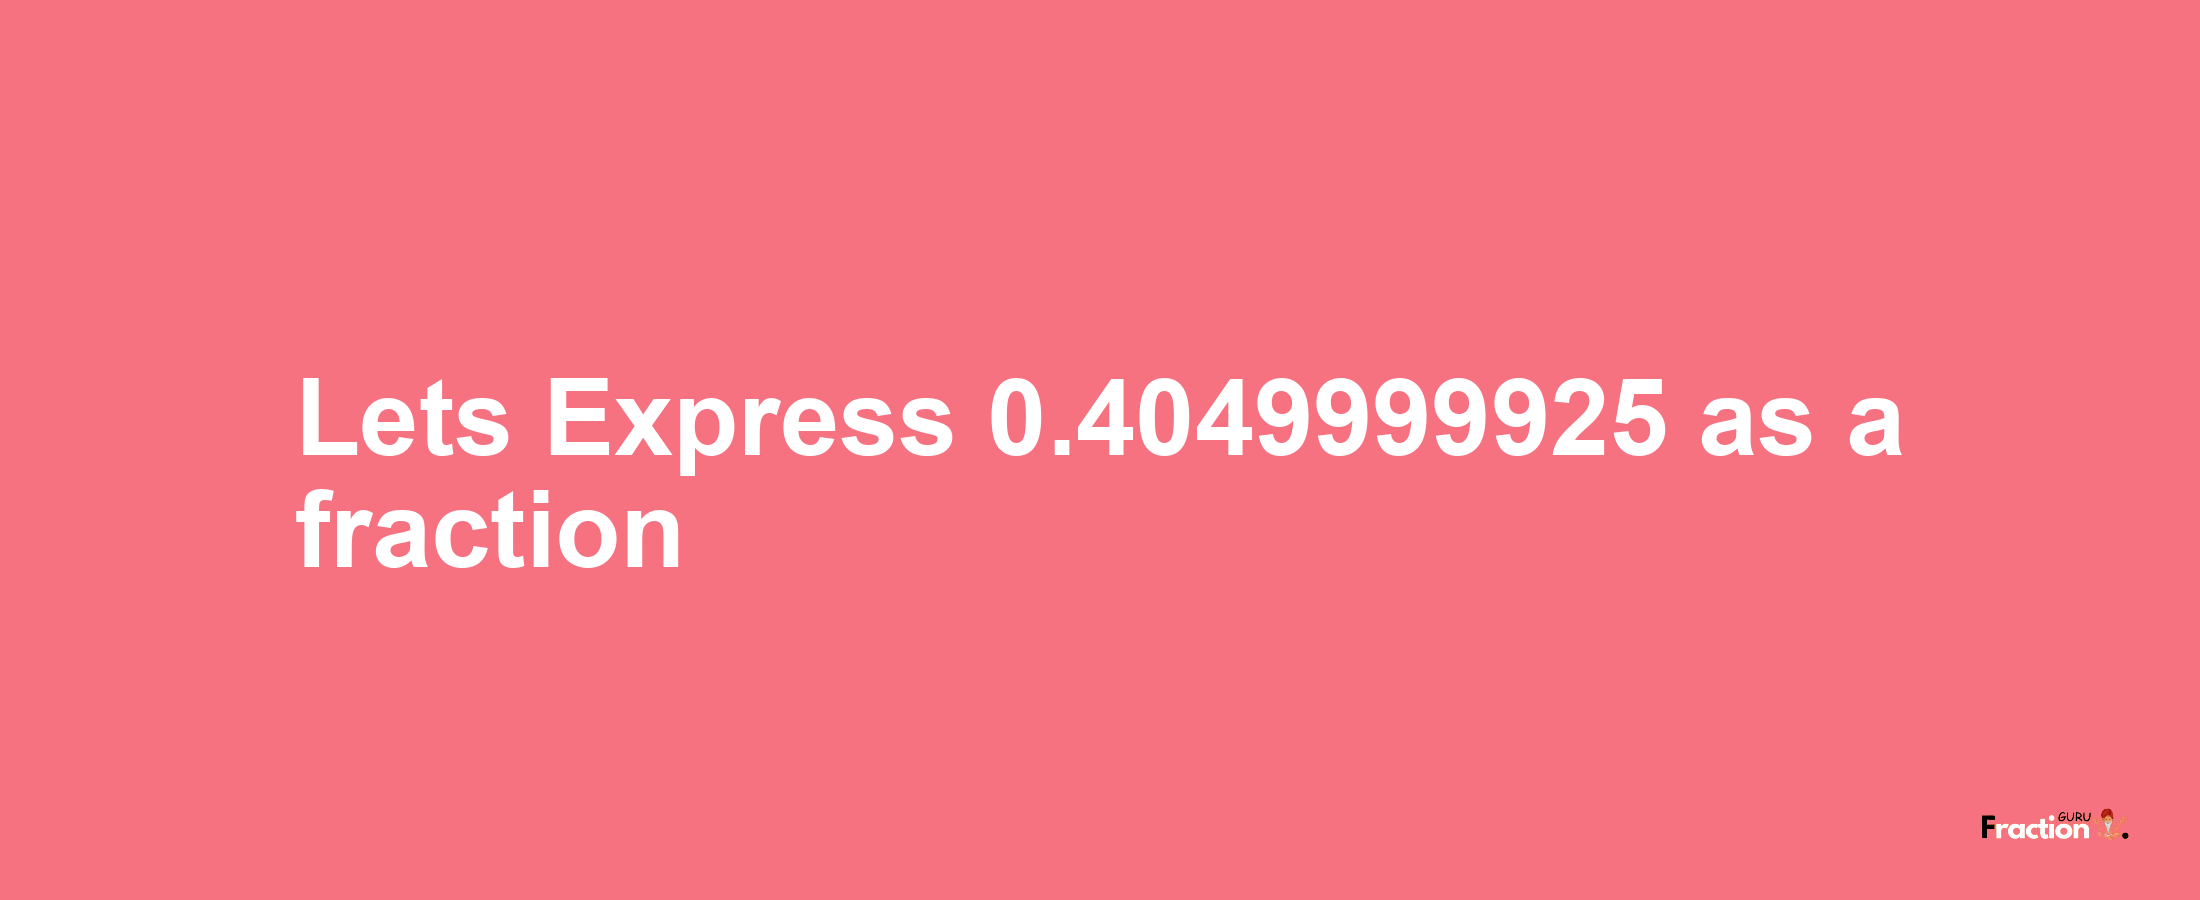 Lets Express 0.4049999925 as afraction